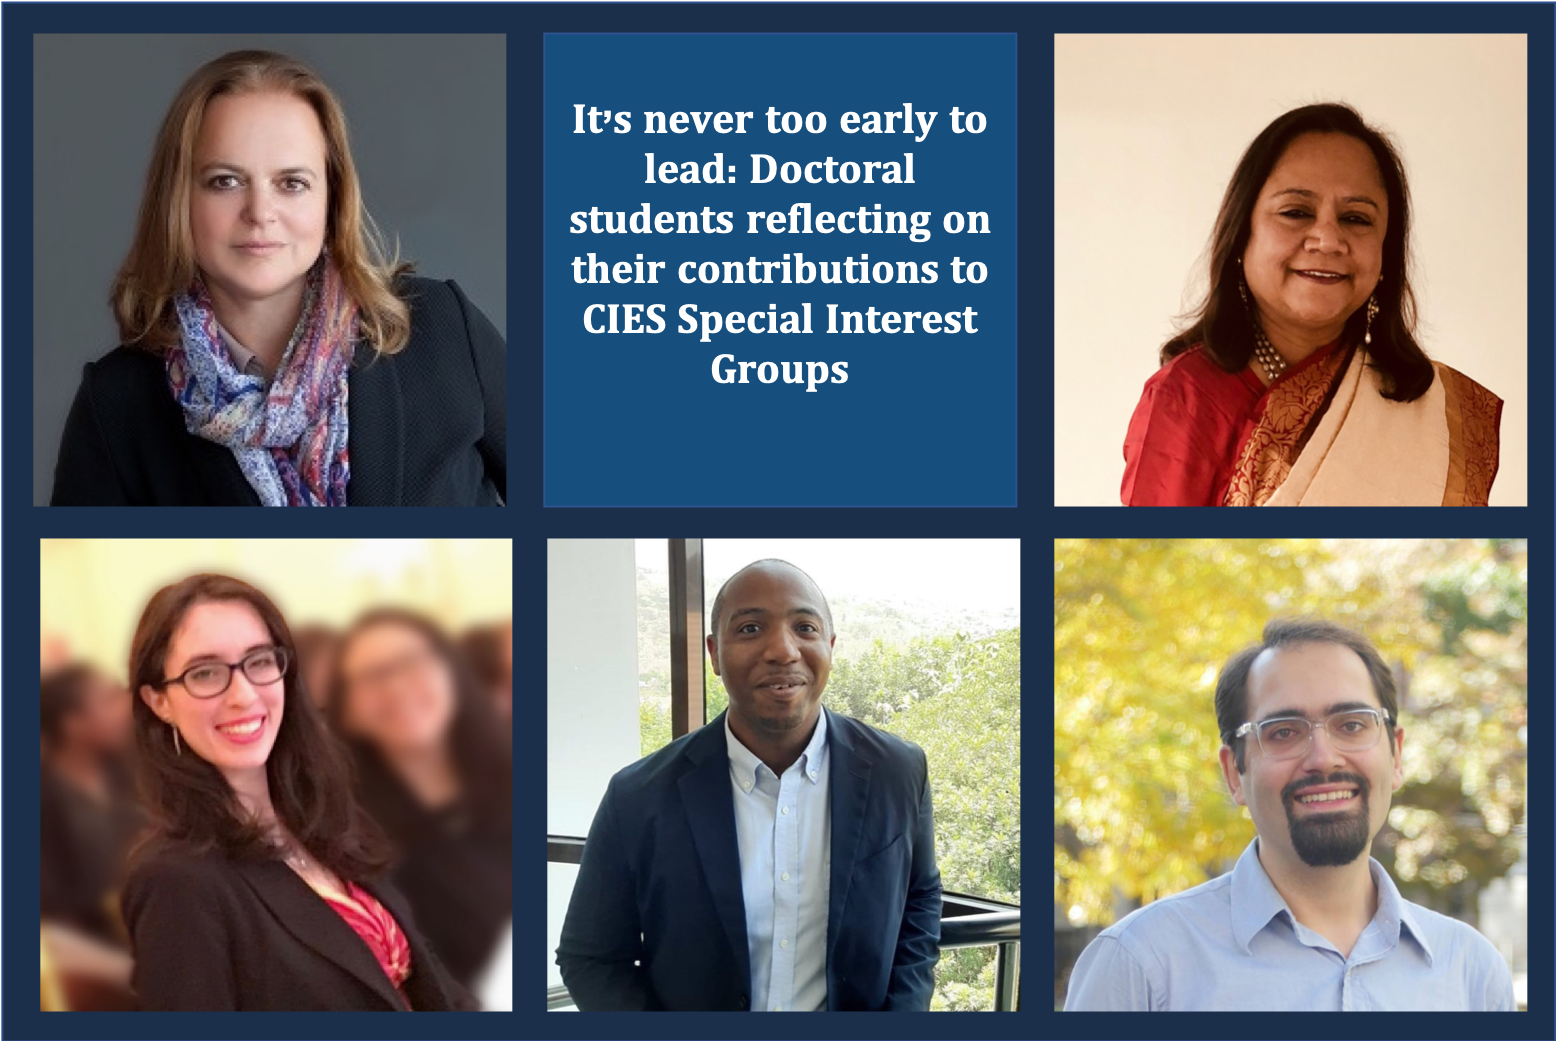 Doctoral students who are CIES SIG leaders